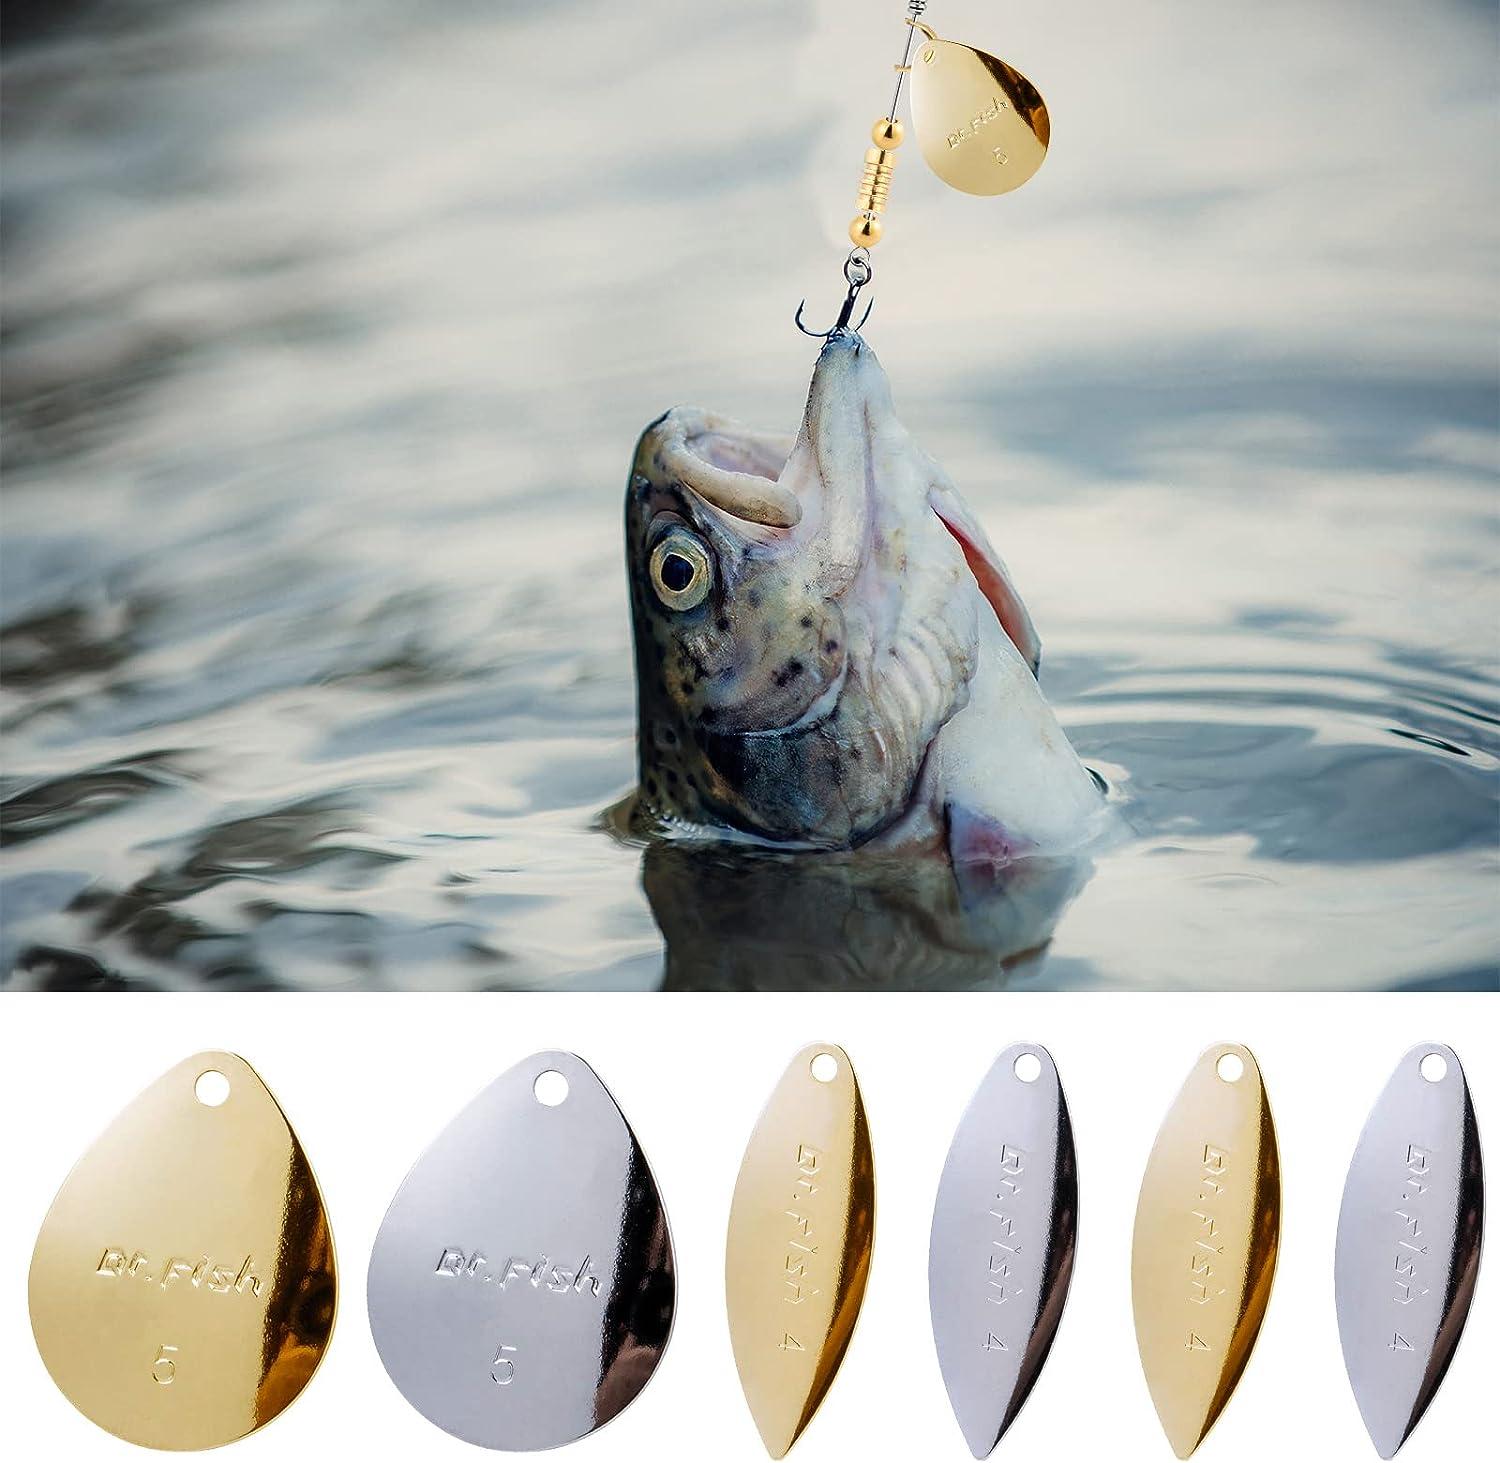  Fishing Spinner Blade Spoon Lures Fishing Lures Kit Lures DIY  Fishing Lure Accessories DIY Lure Material : Sports & Outdoors